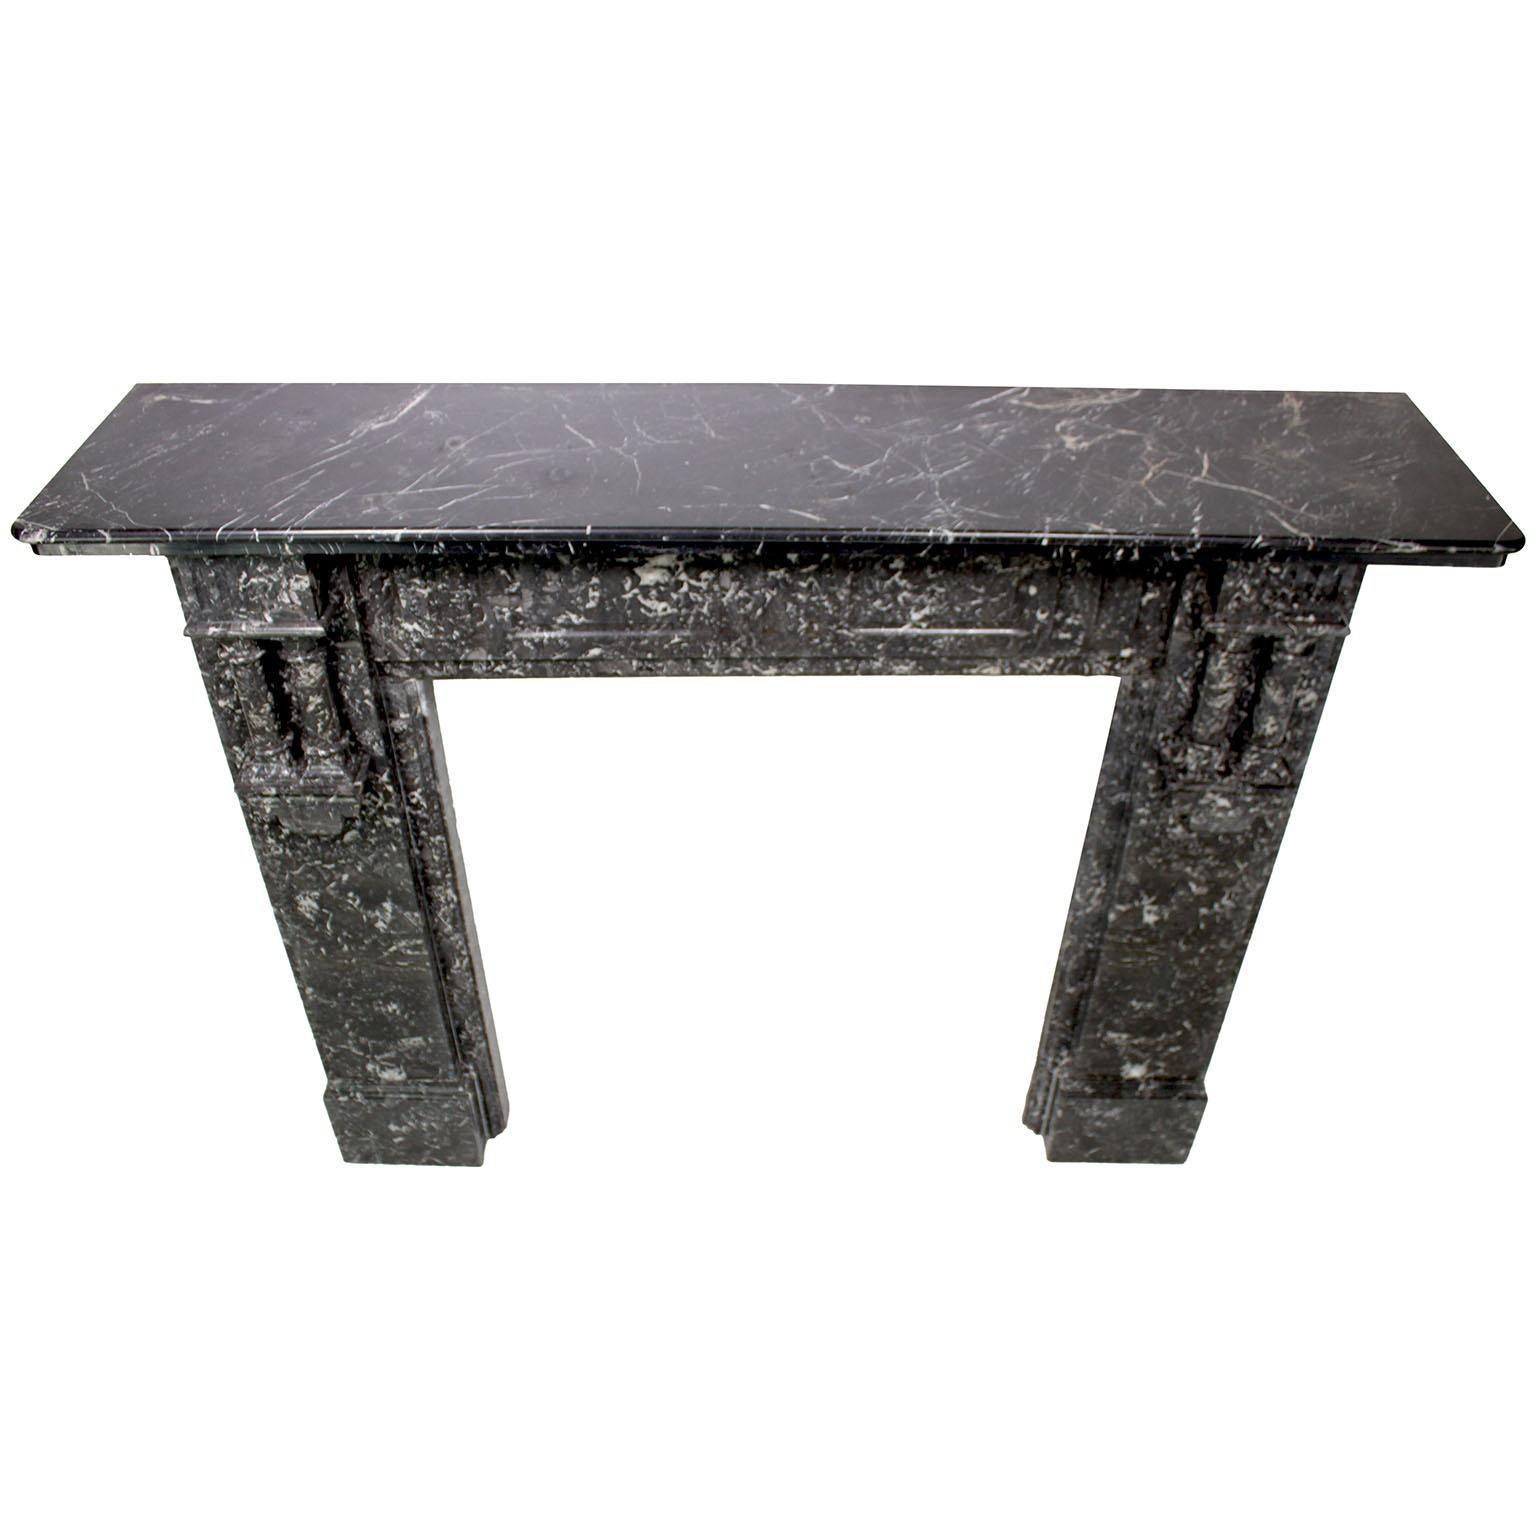 French 19th-20th Century Louis XVI Style Veined Grey Marble Fireplace Mantel For Sale 2